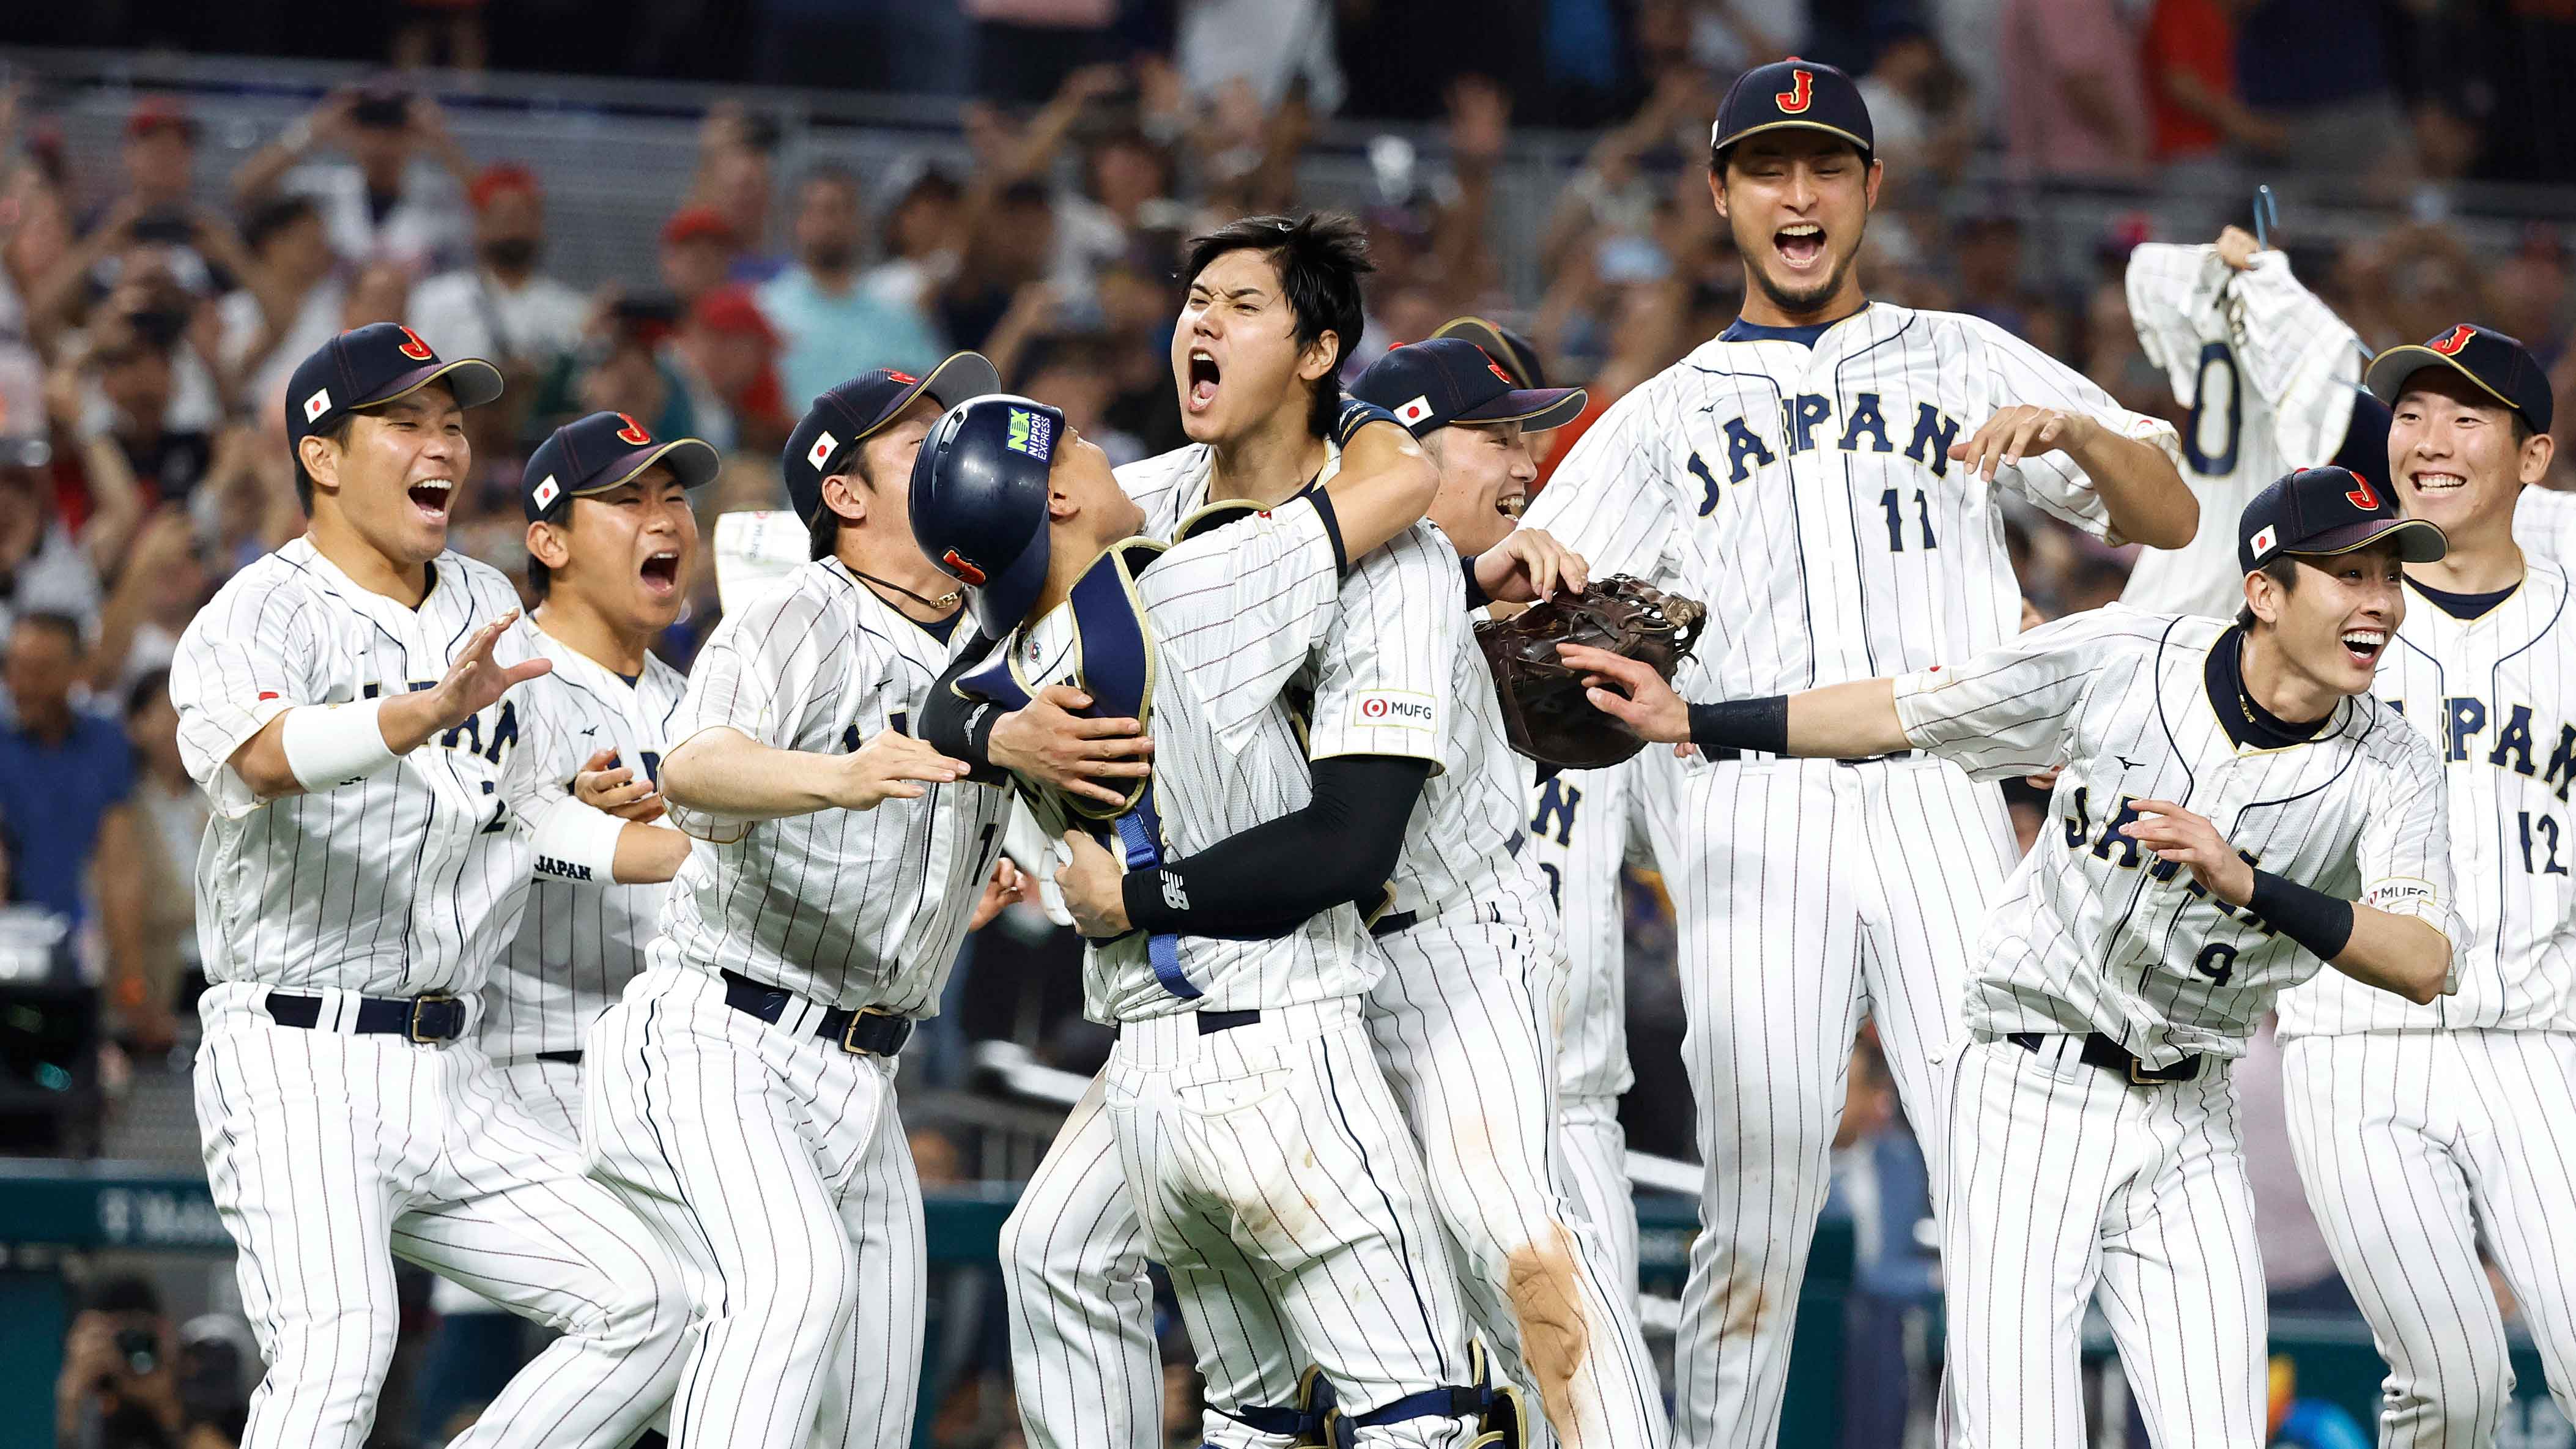 When did baseball start in Japan and how did it become so popular